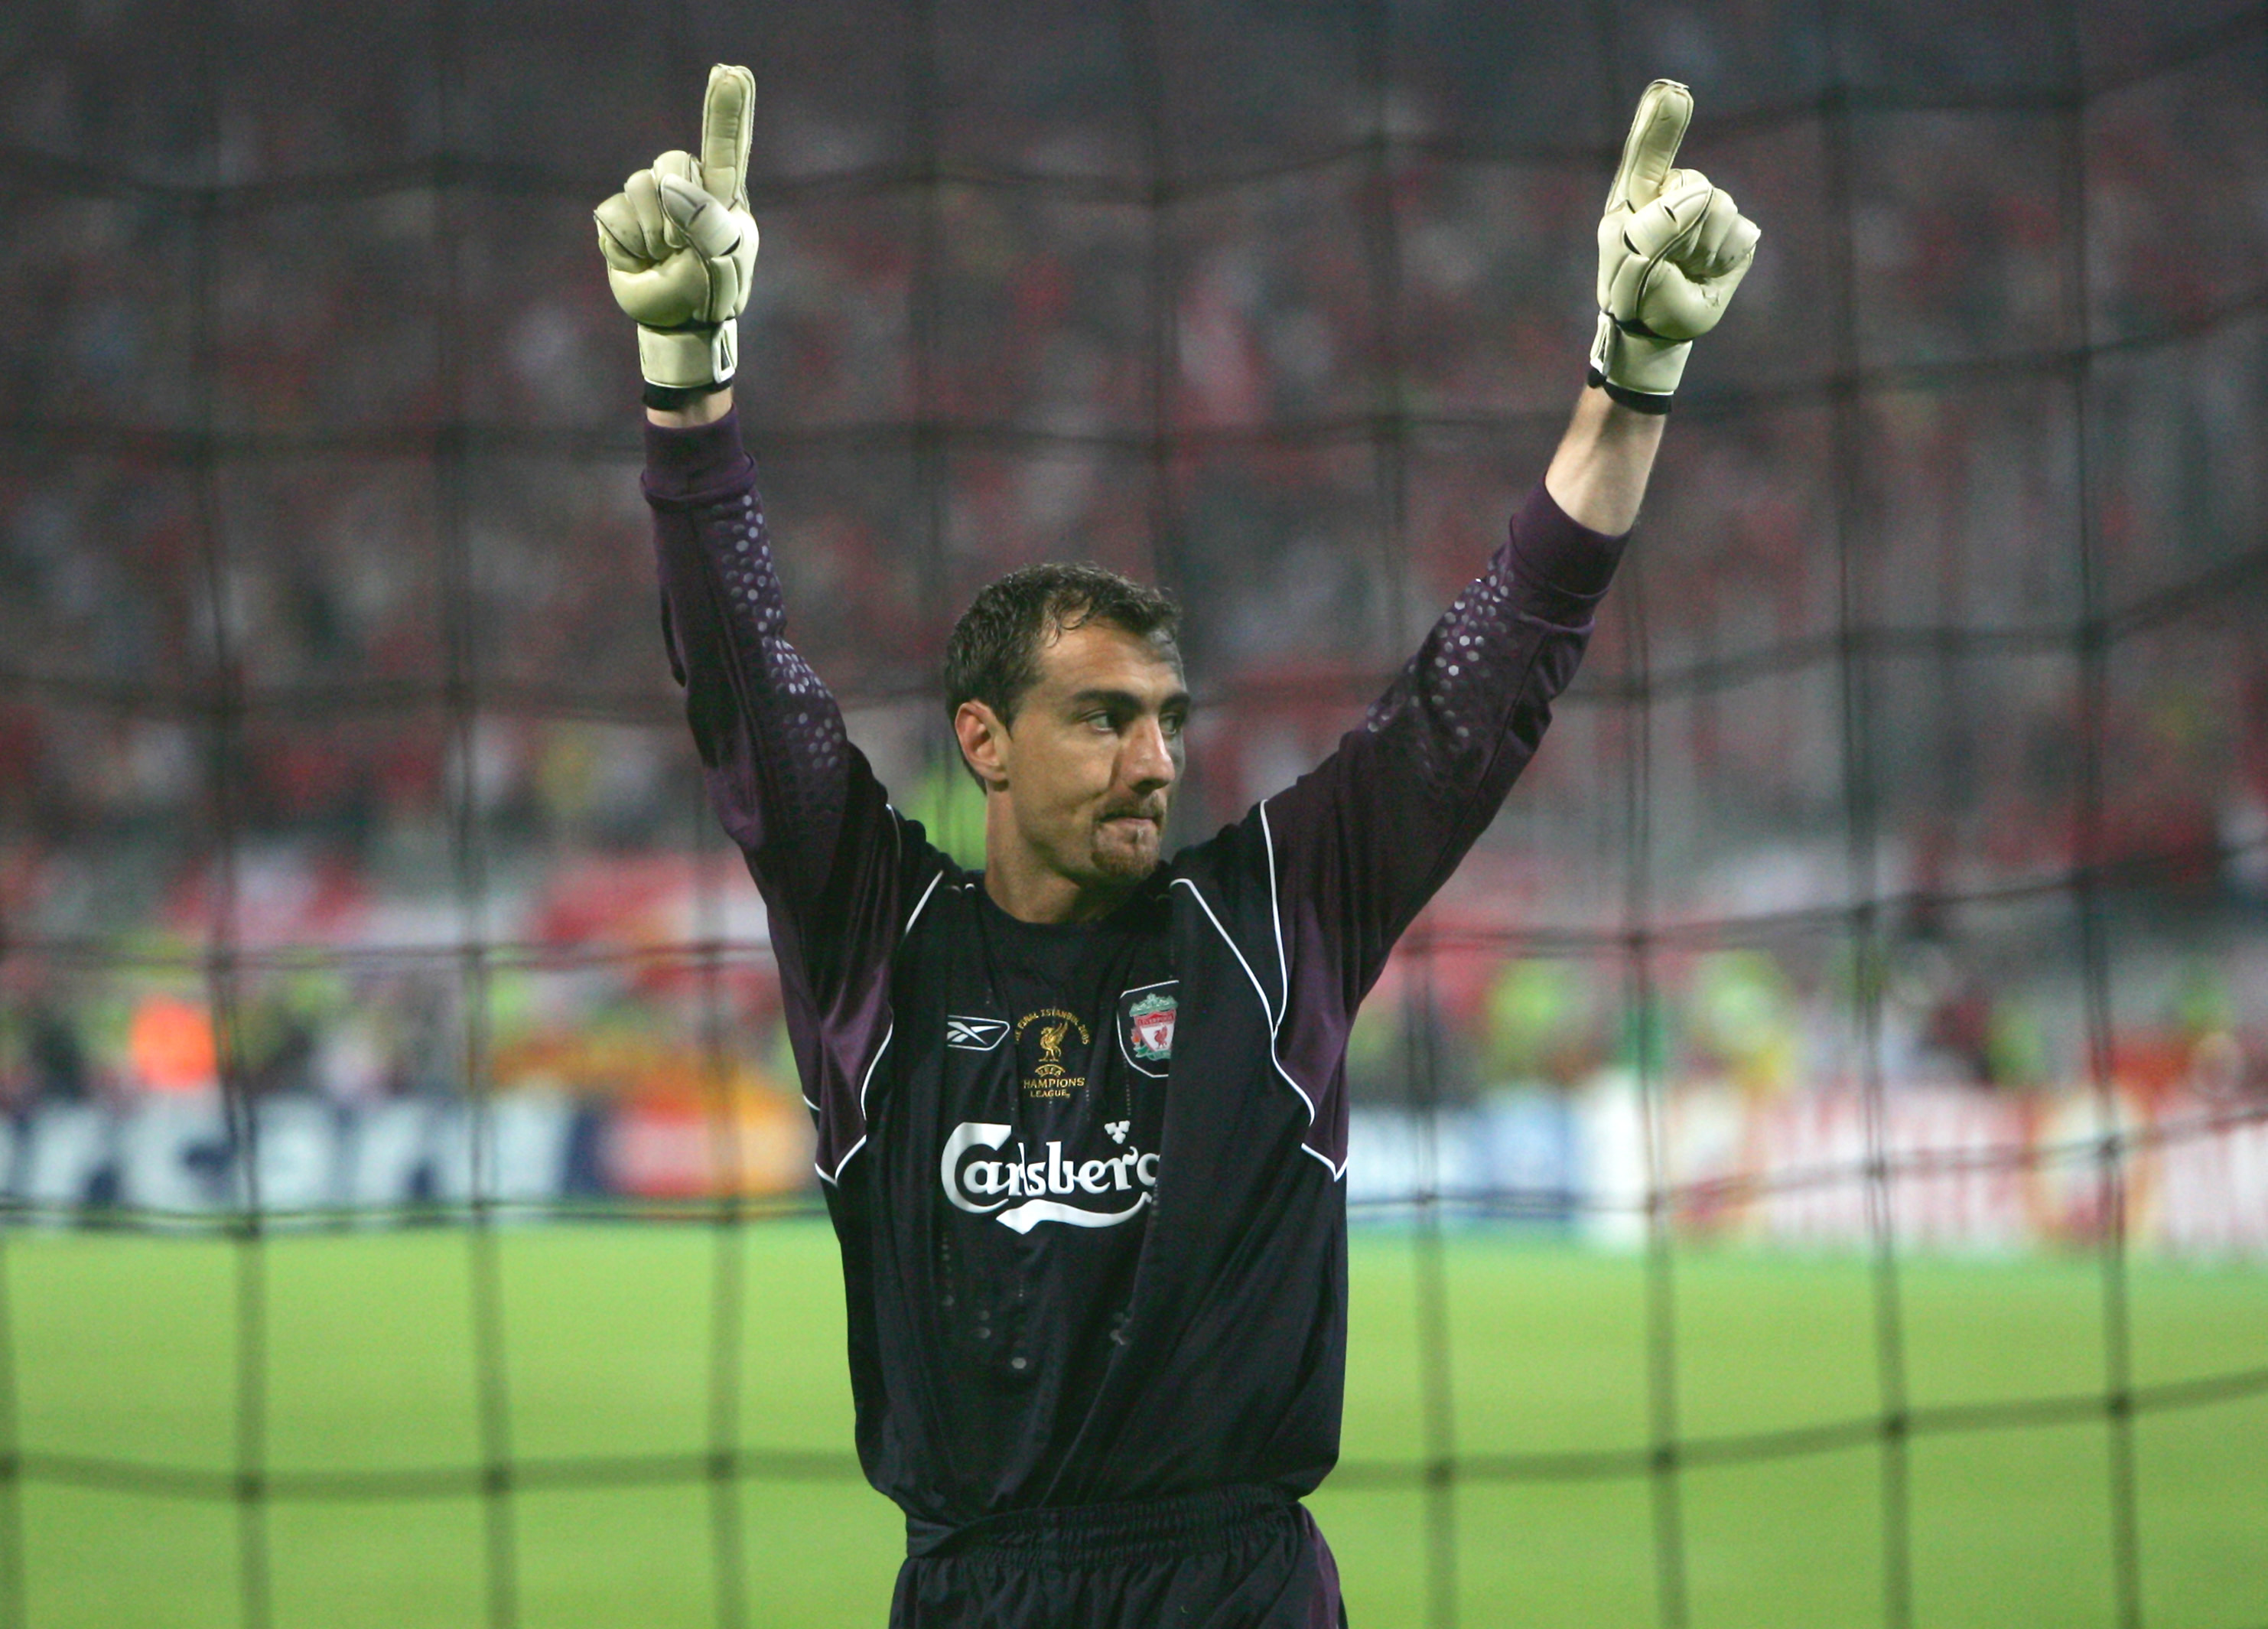 ISTANBUL, TURKEY - MAY 25:  Jerzy Dudek of Liverpool celebrates in the shoot out during the European Champions League final between Liverpool and AC Milan on May 25, 2005 at the Ataturk Olympic Stadium in Istanbul, Turkey.   (Photo by Alex Livesey/Getty I